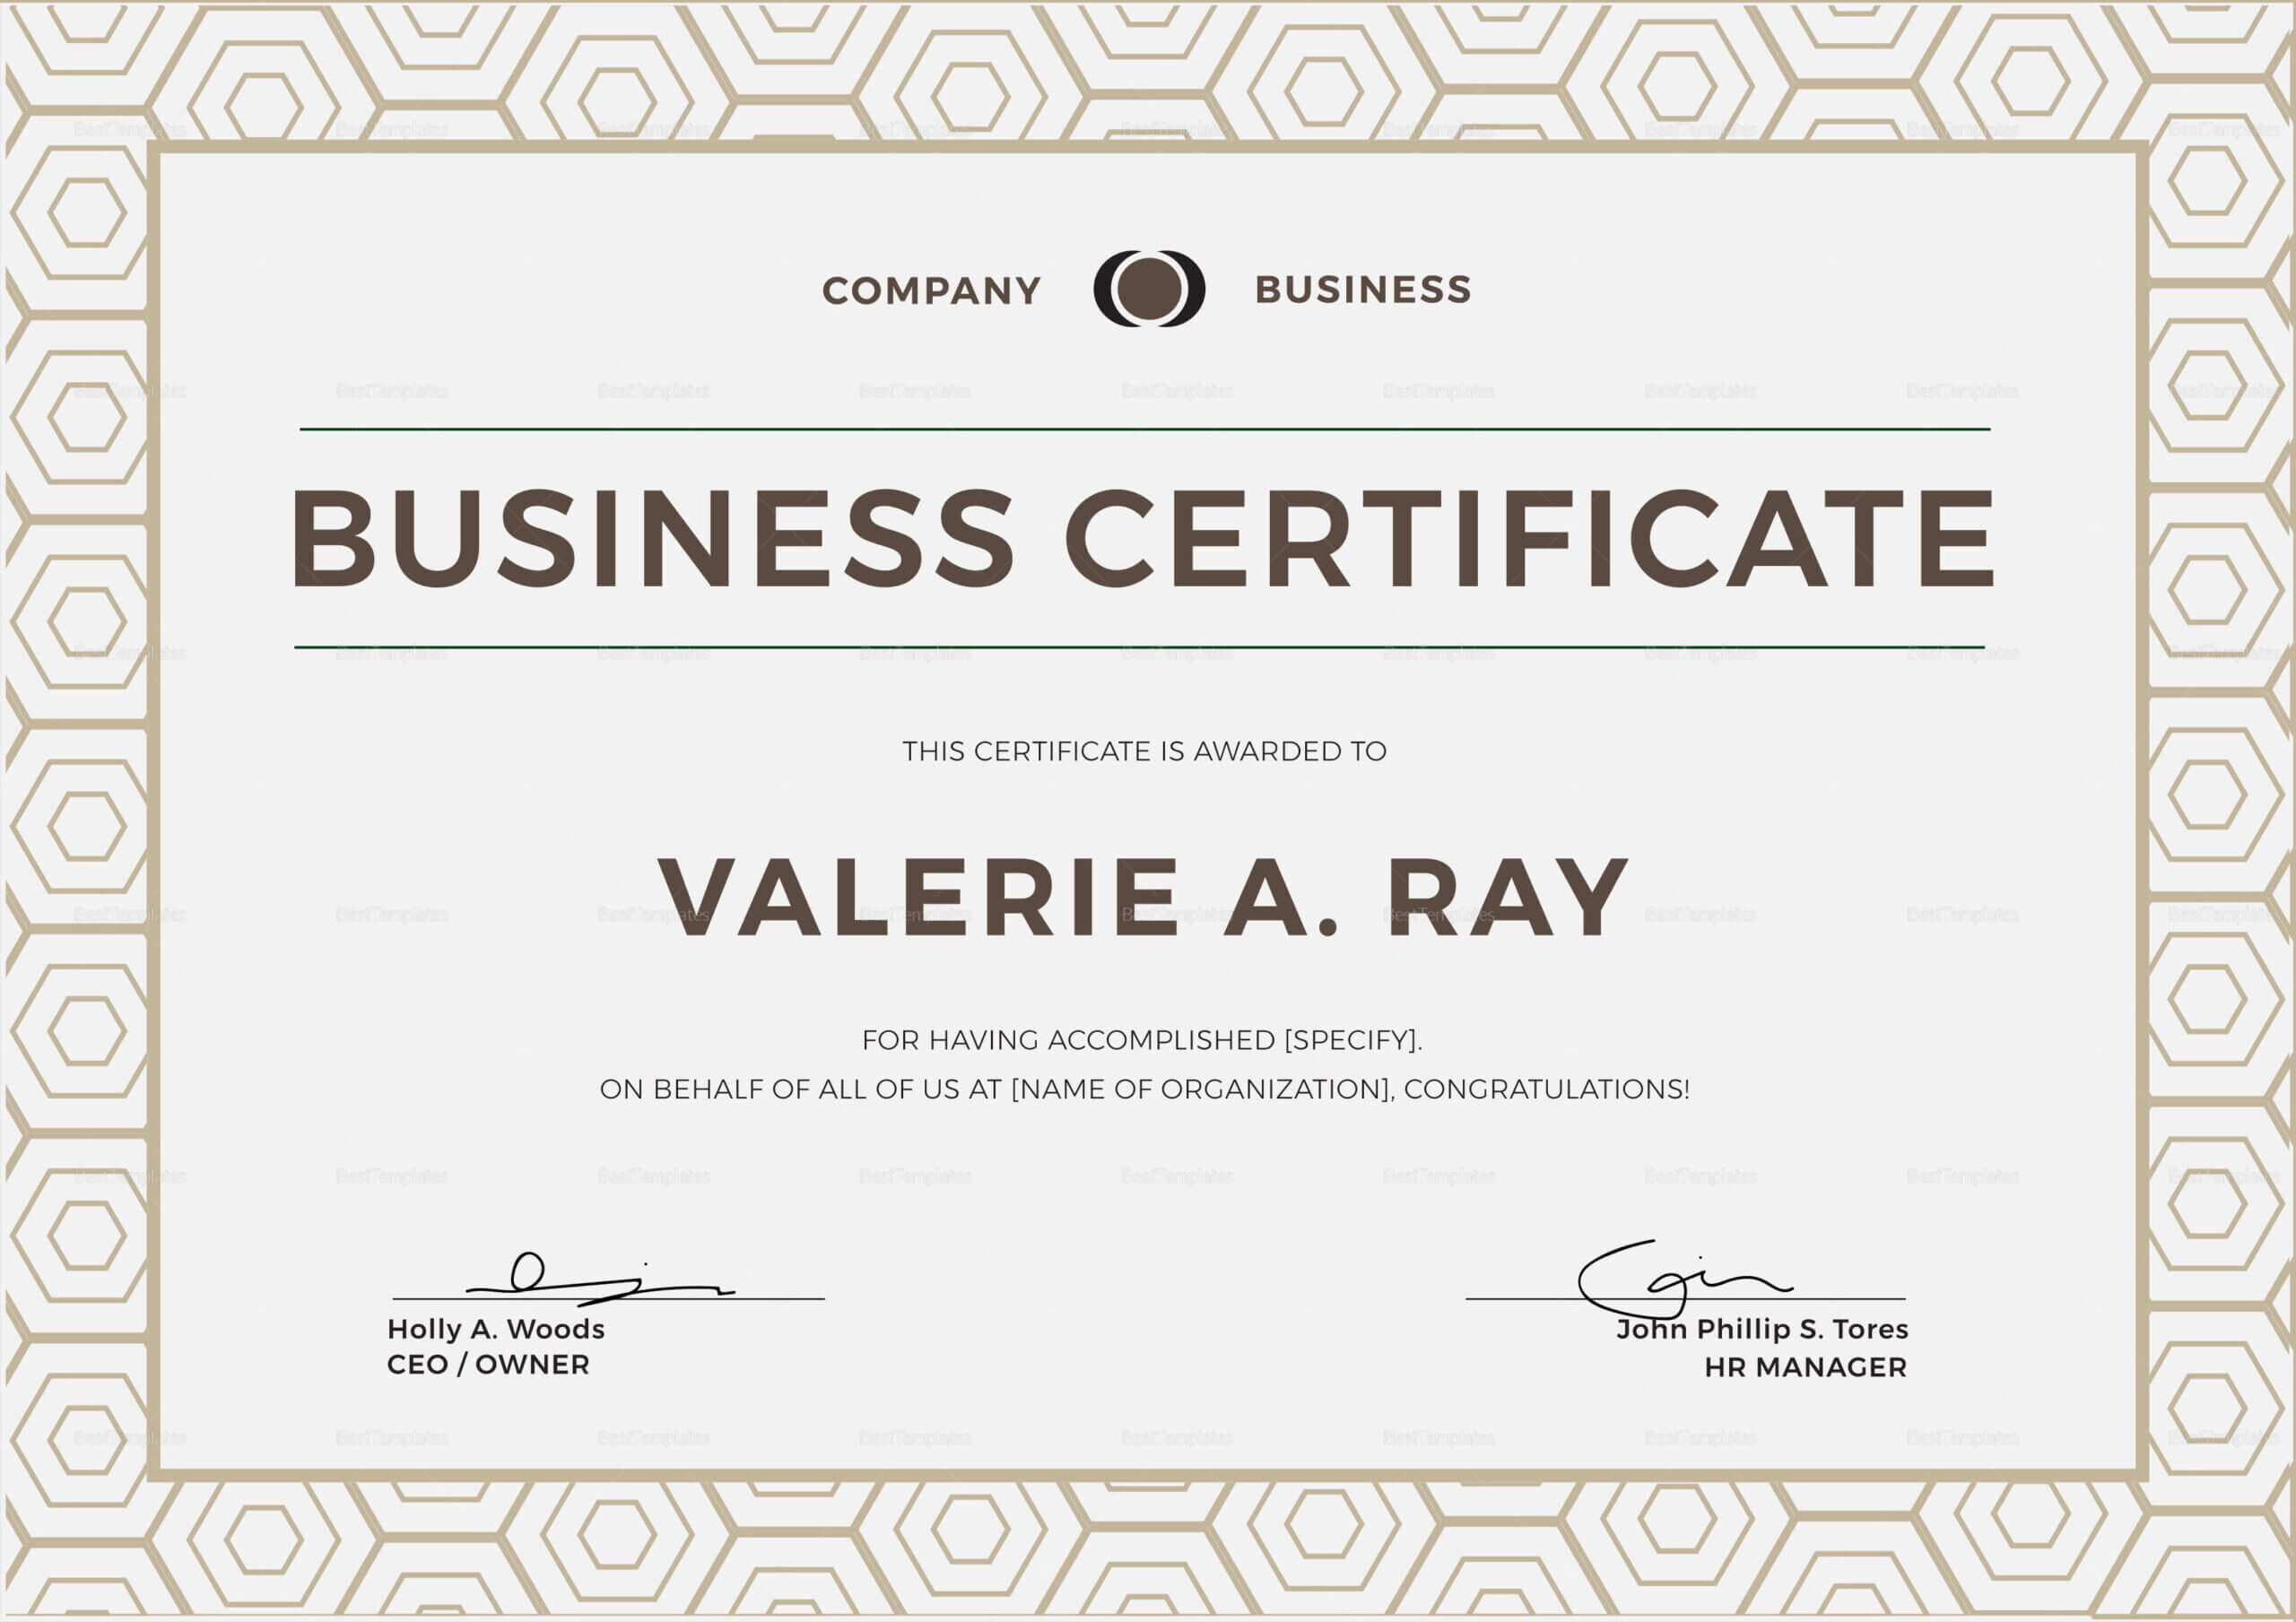 business-certificate-sample-calep-midnightpig-co-pertaining-to